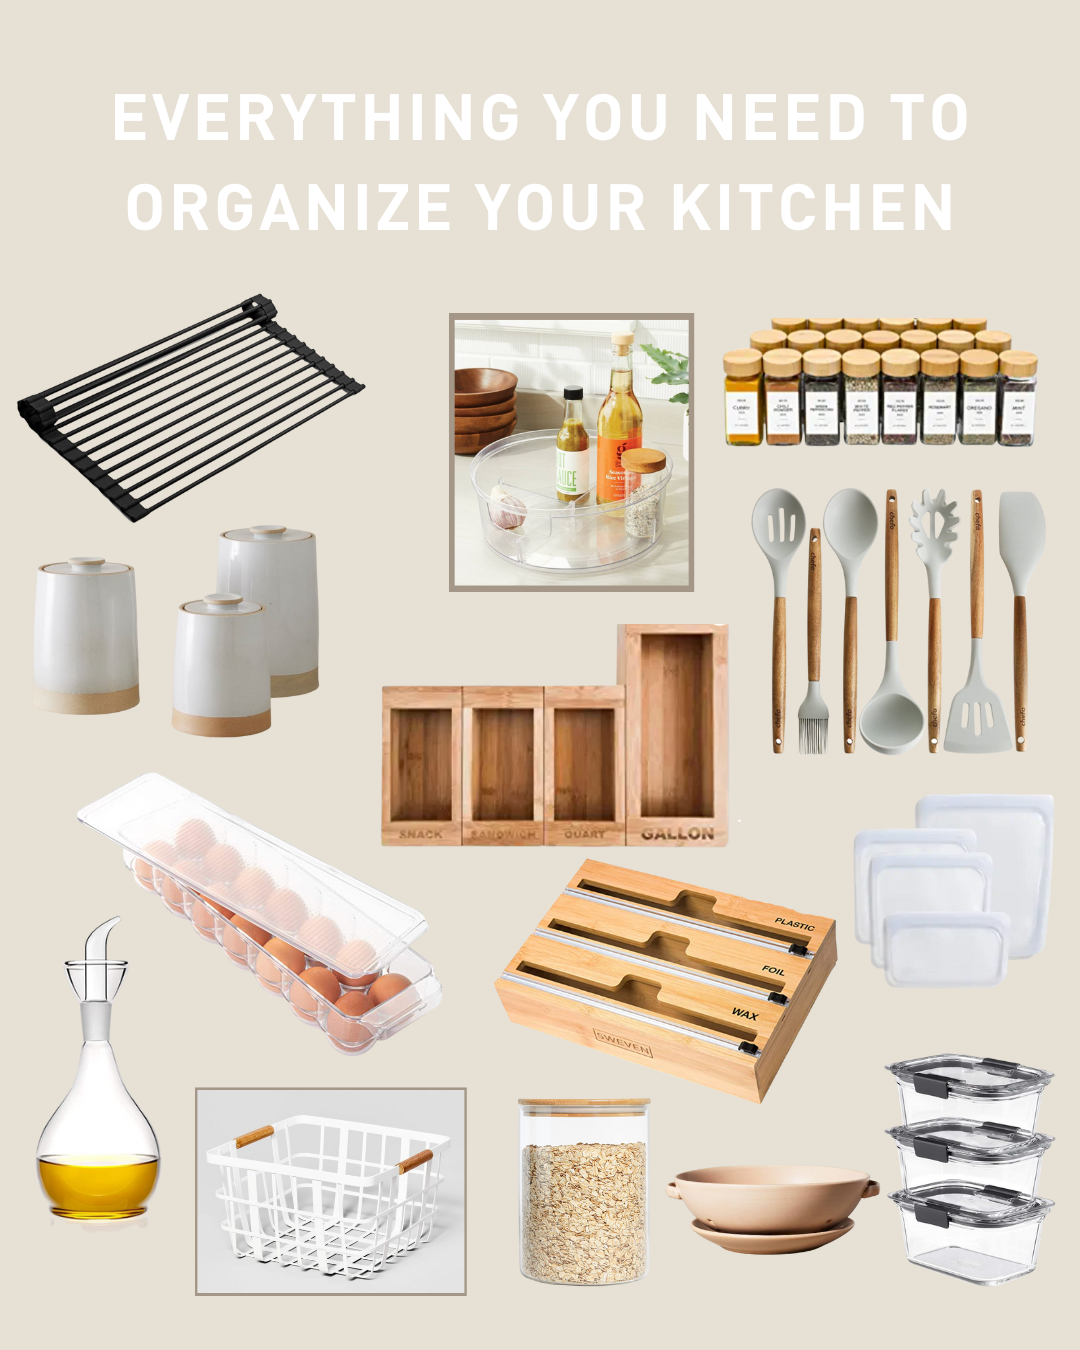 Everything You Need to Organize Your Kitchen - Rachael's Good Eats